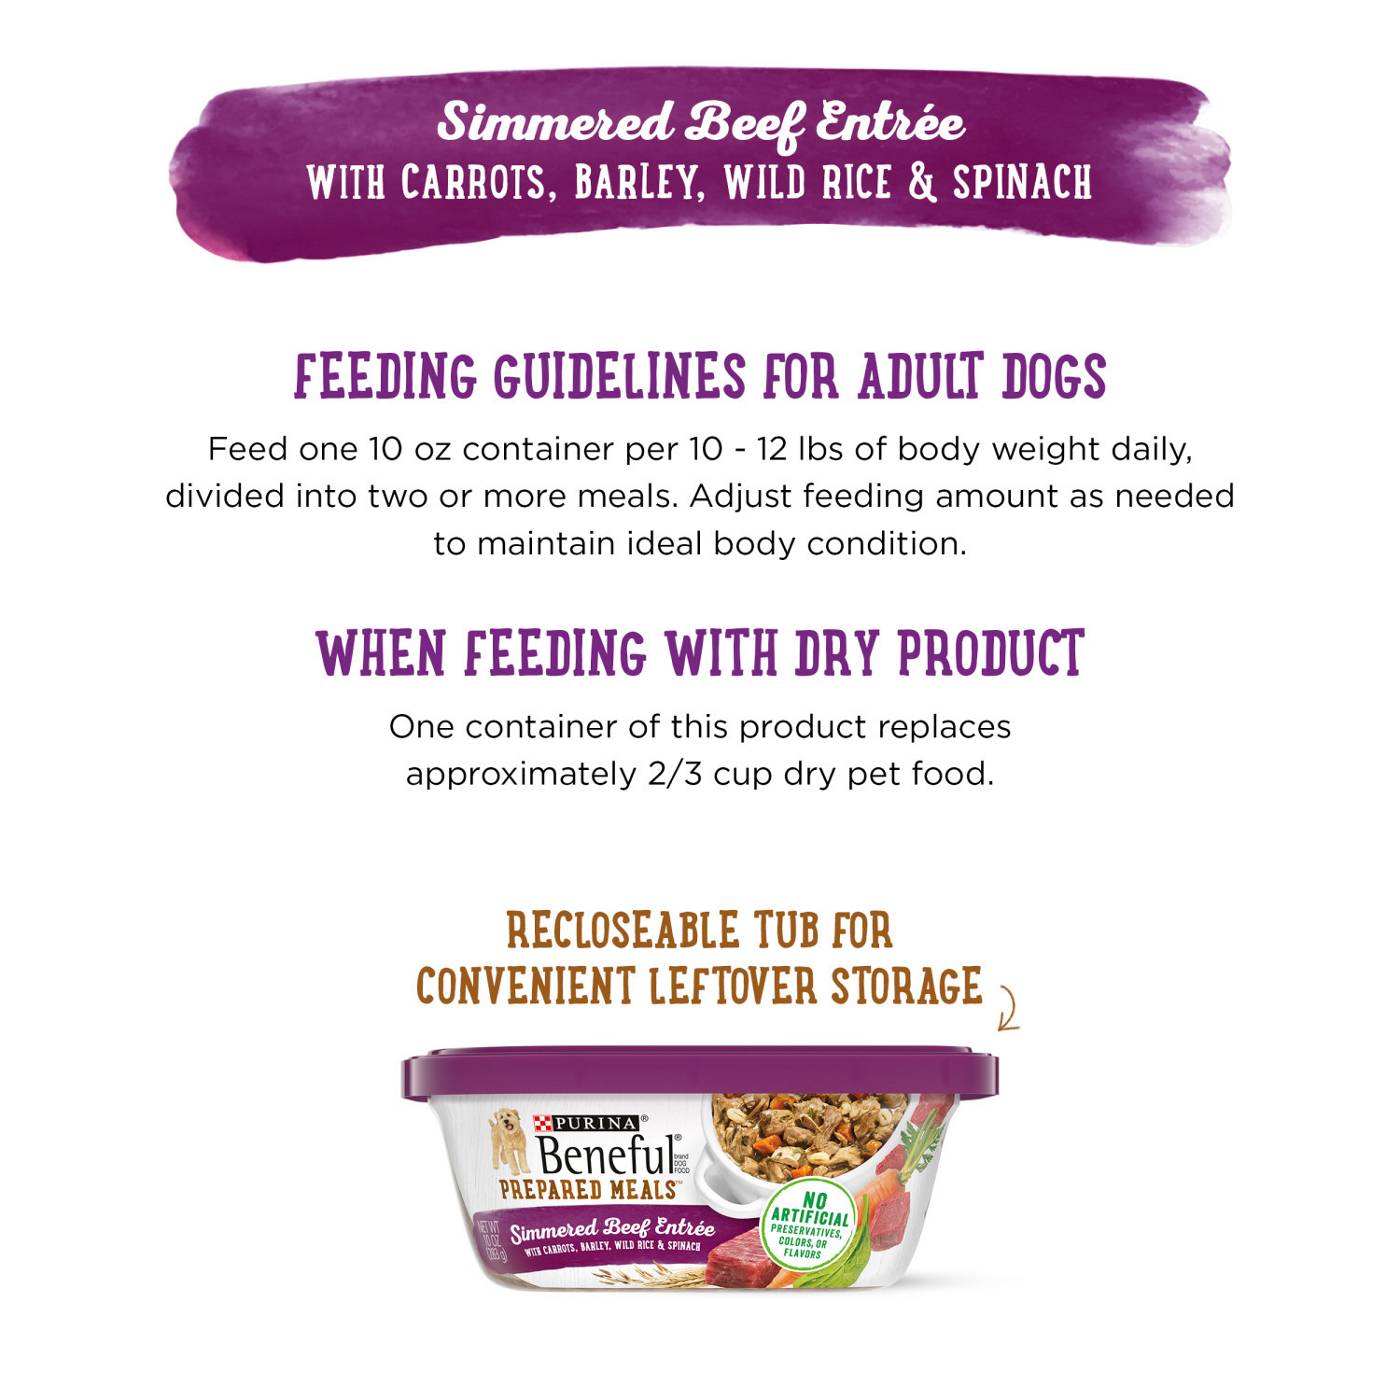 Beneful Purina Beneful High Protein, Wet Dog Food With Gravy, Prepared Meals Simmered Beef Entree; image 7 of 8